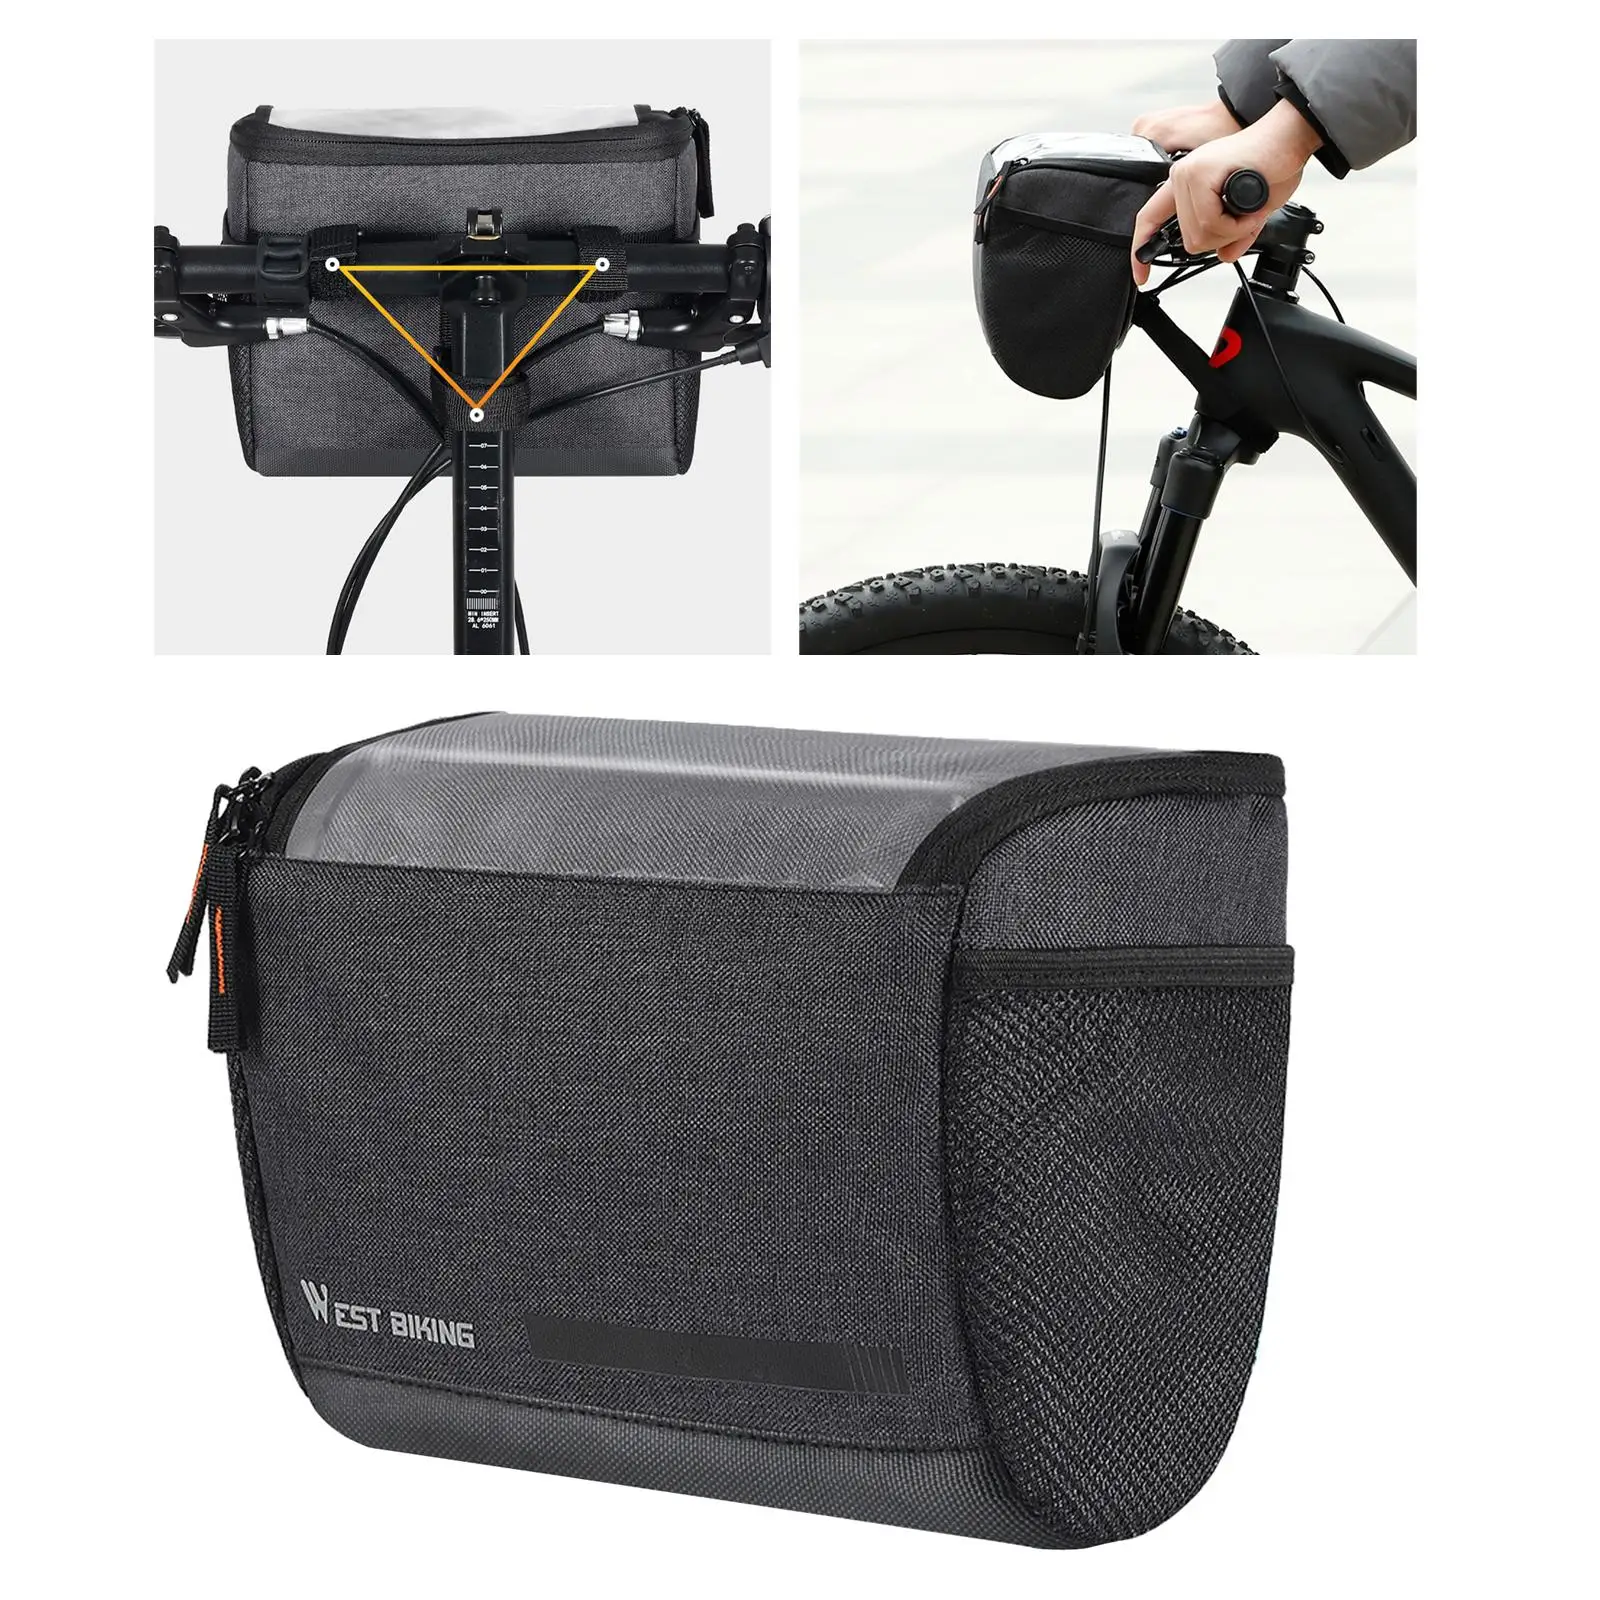 Bicycle Bag Insulated Trunk Cooler Pack Cycling Bicycle Rear Rack Storage Luggage Pouch MTB Bike Pannier Shoulder Bag